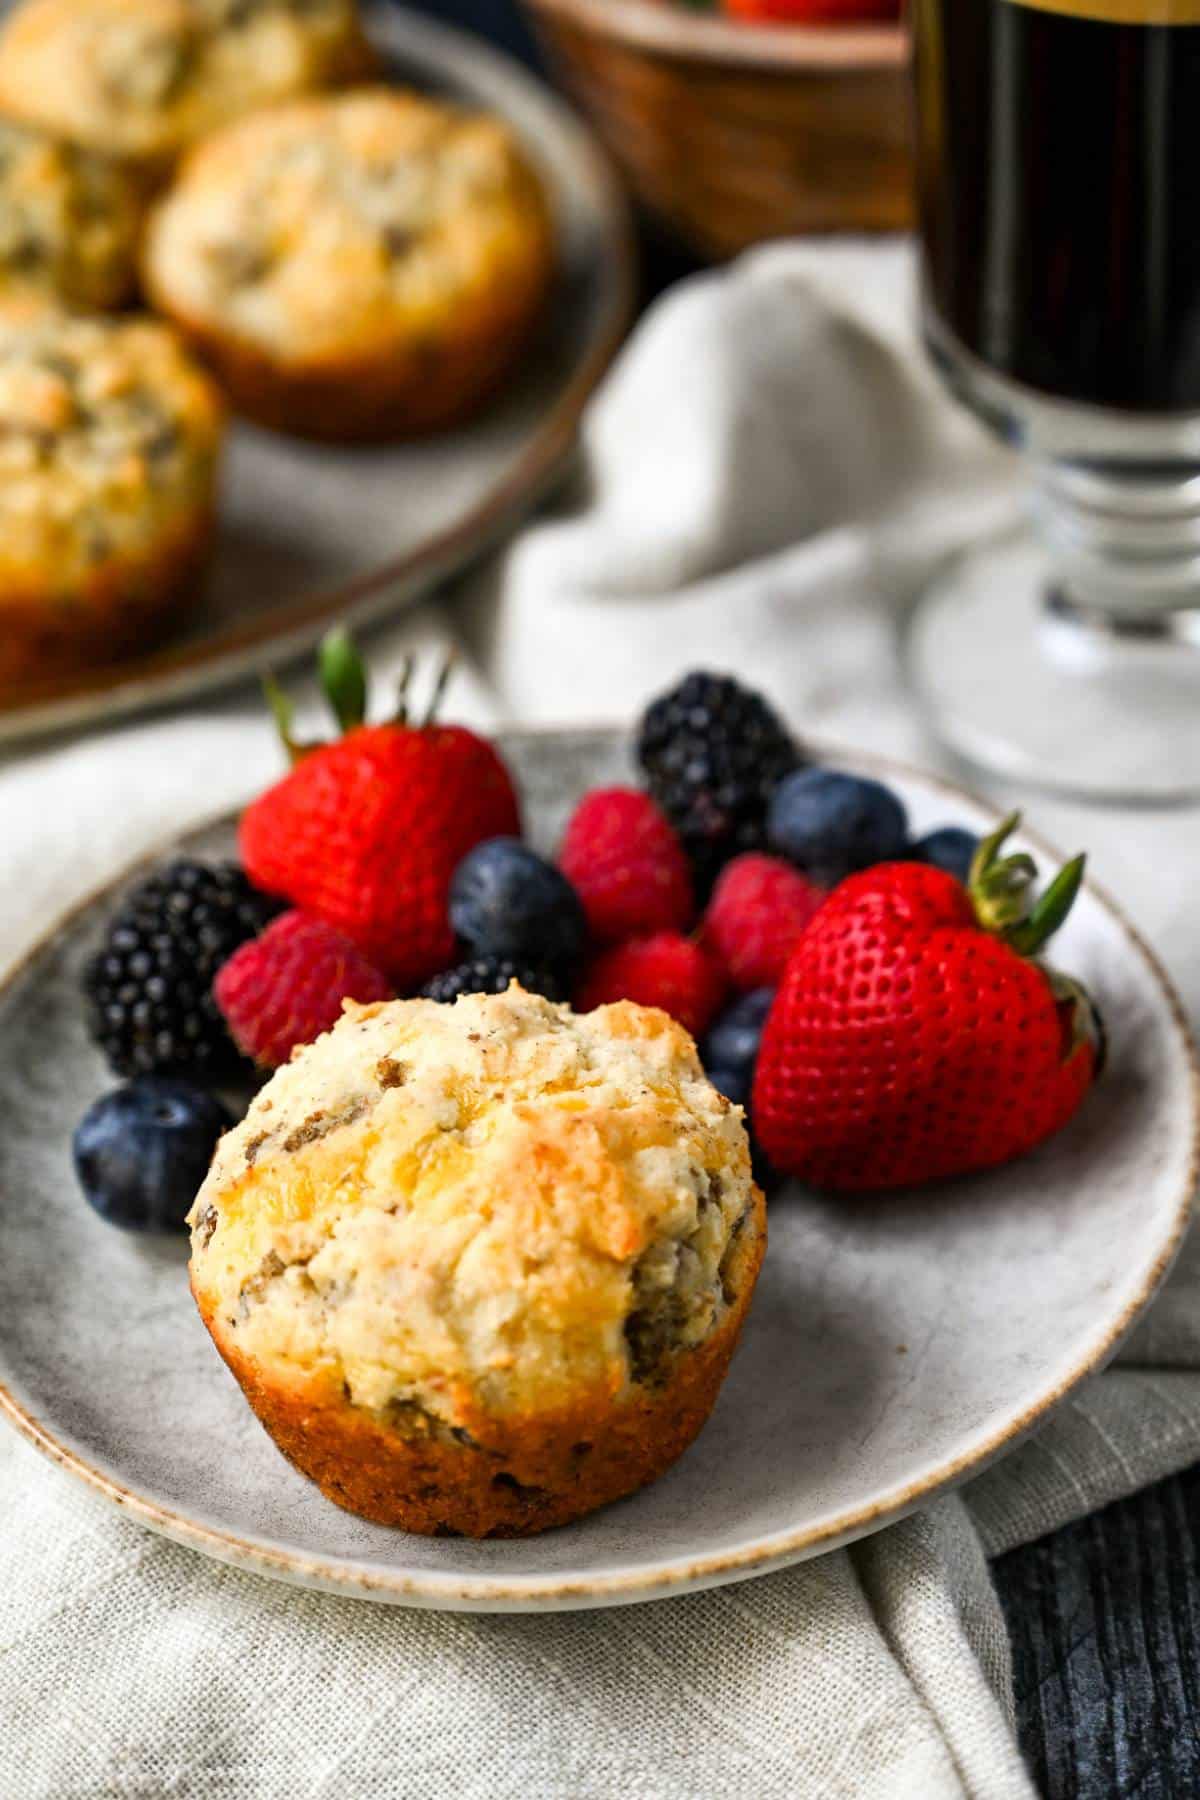 a sausage and cheese muffin on a gray plate with strawberries, blueberries, and raspberries with a cup of black coffee